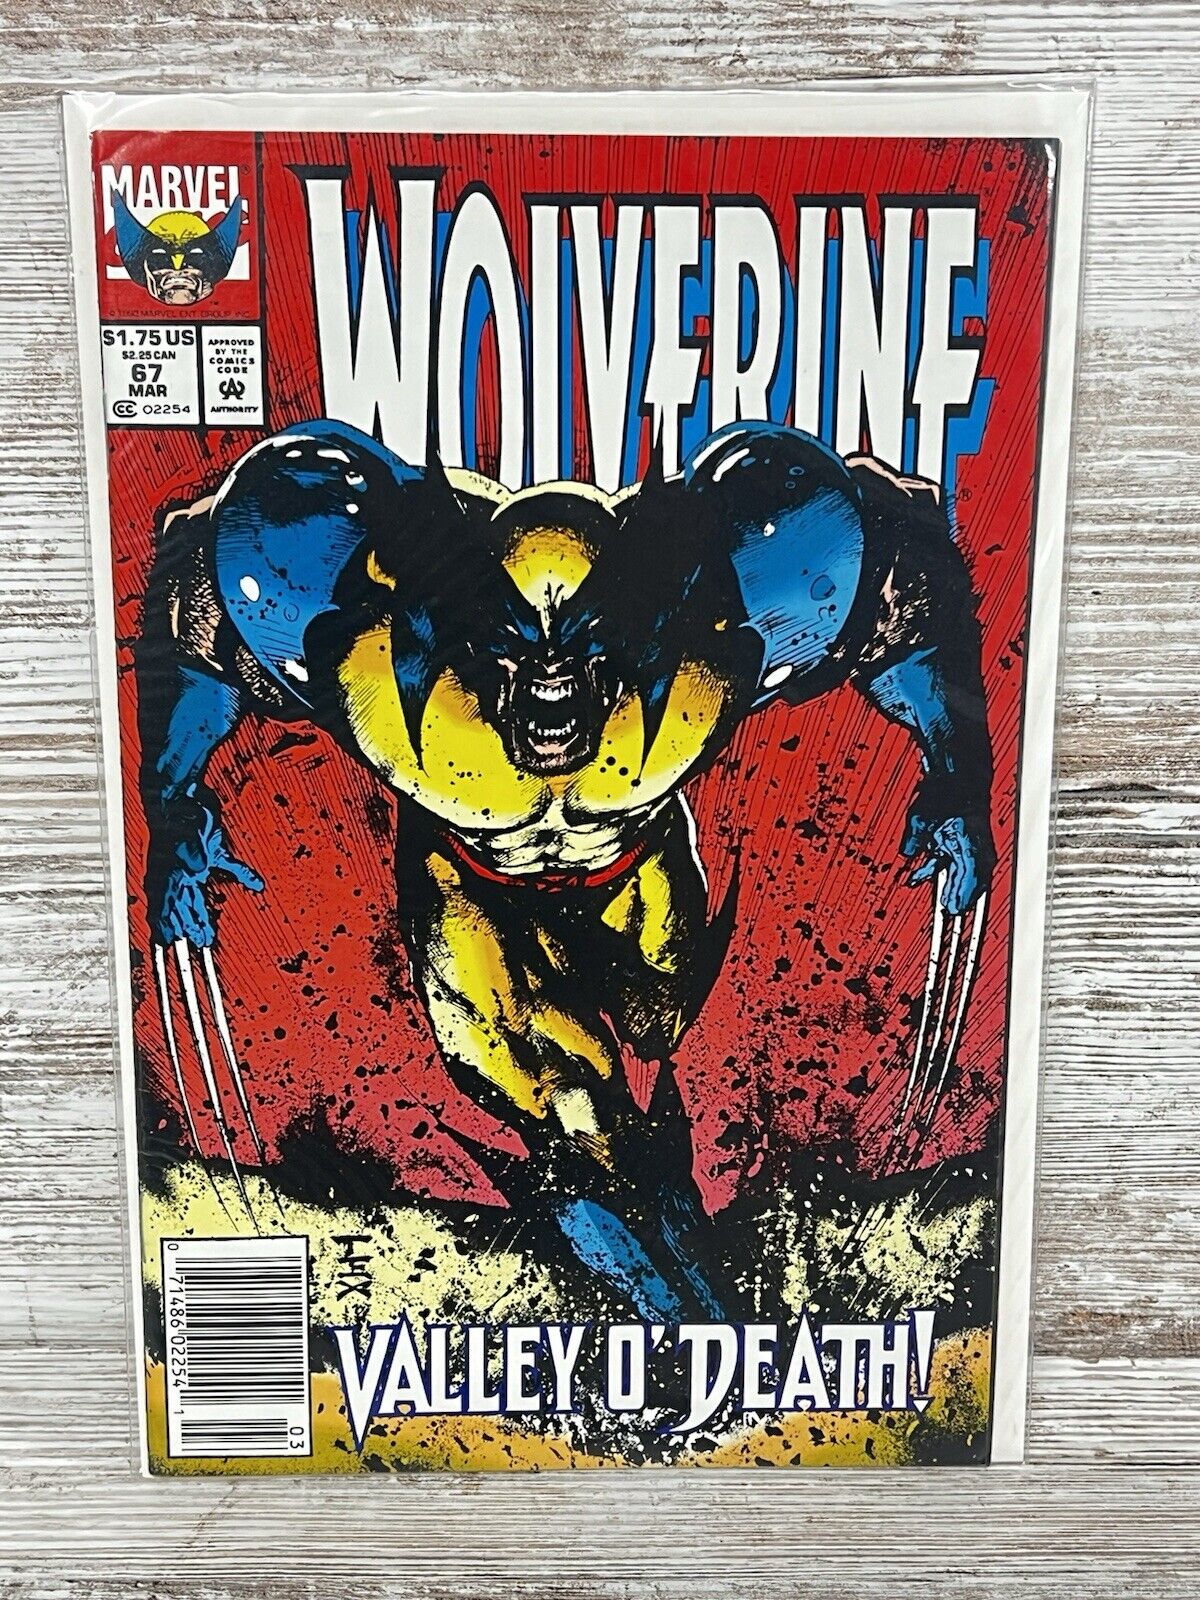 Marvel Wolverine #67 Vol. 2 1993 Newstand Amazing cover VF/NM